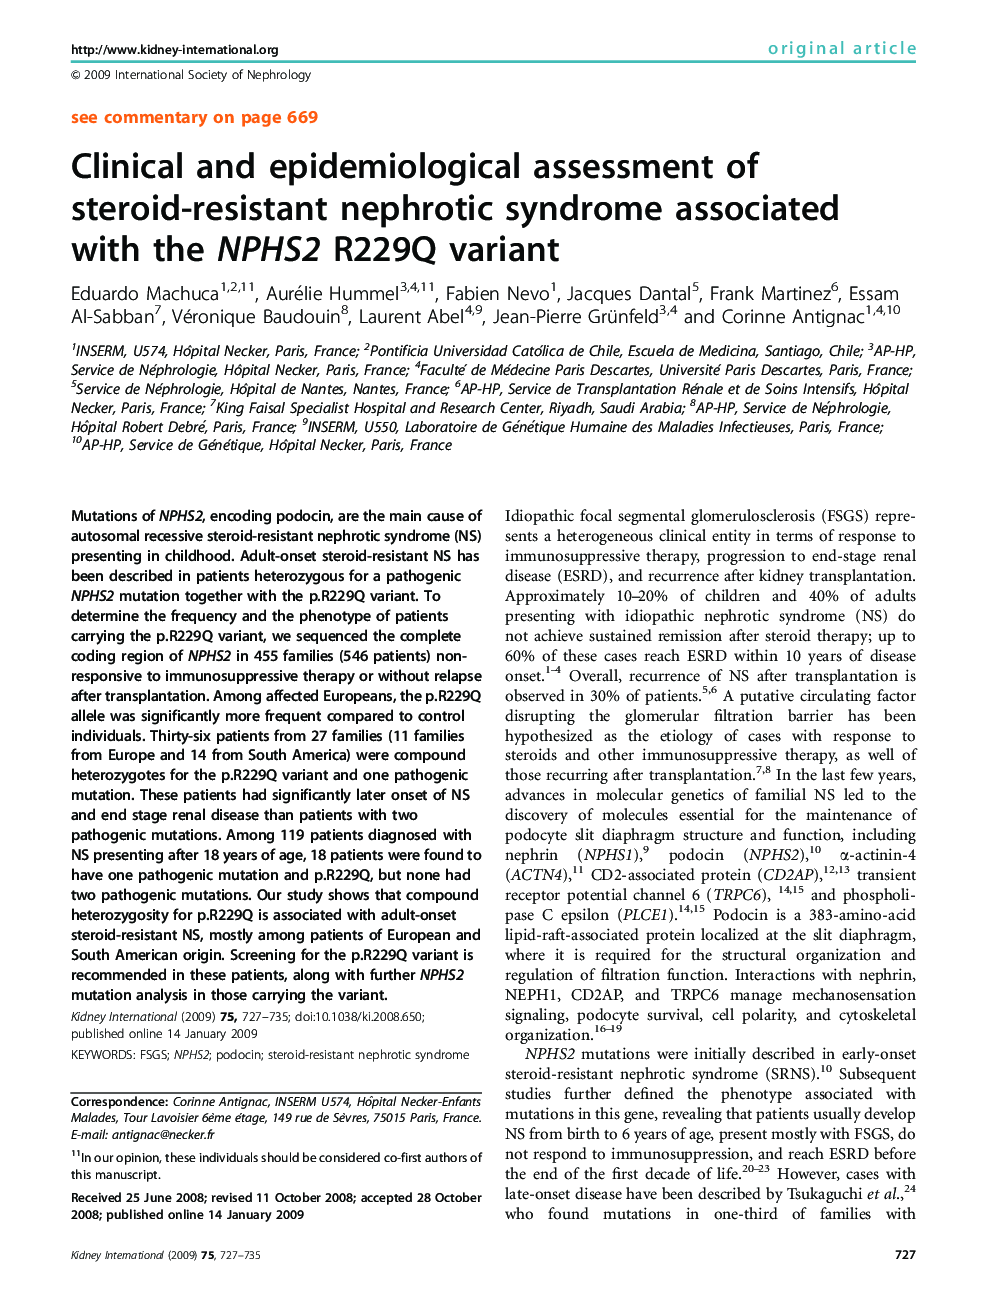 Clinical and epidemiological assessment of steroid-resistant nephrotic syndrome associated with the NPHS2 R229Q variant 